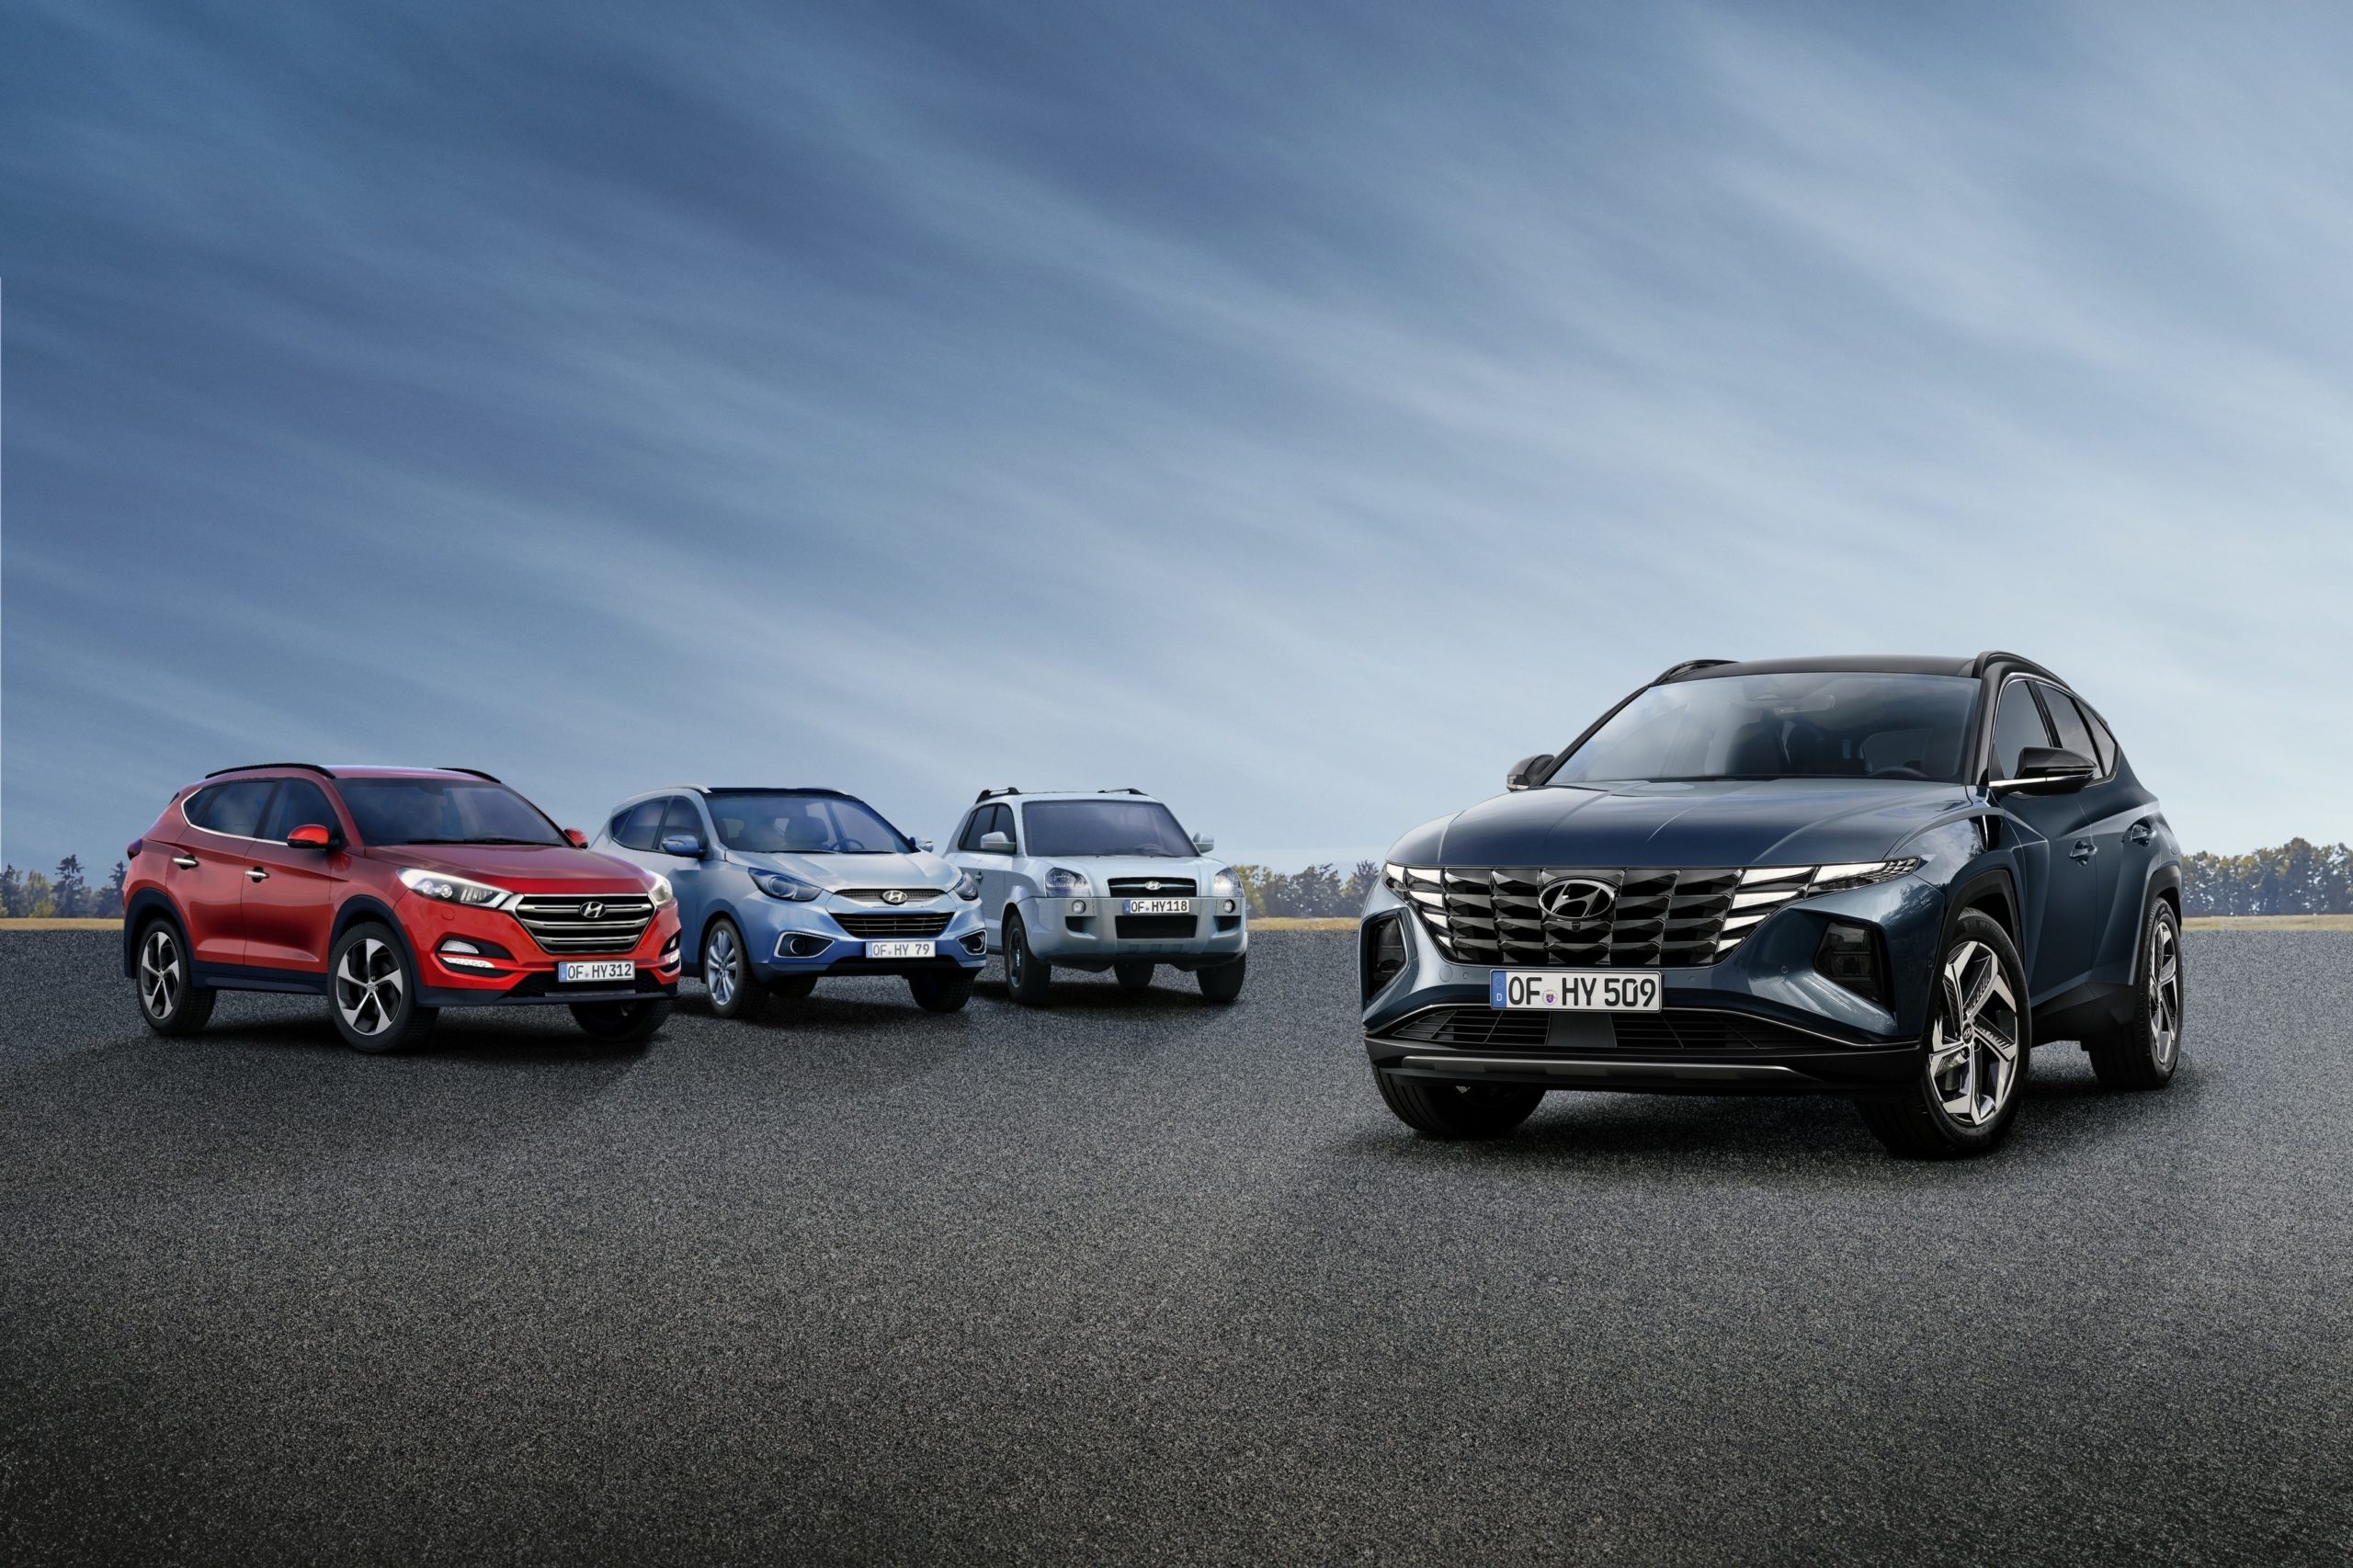 It Is Time To Say Ramadan Kareem: Here’s A List Of All Automotive Ramadan Offers For 2023 In The UAE